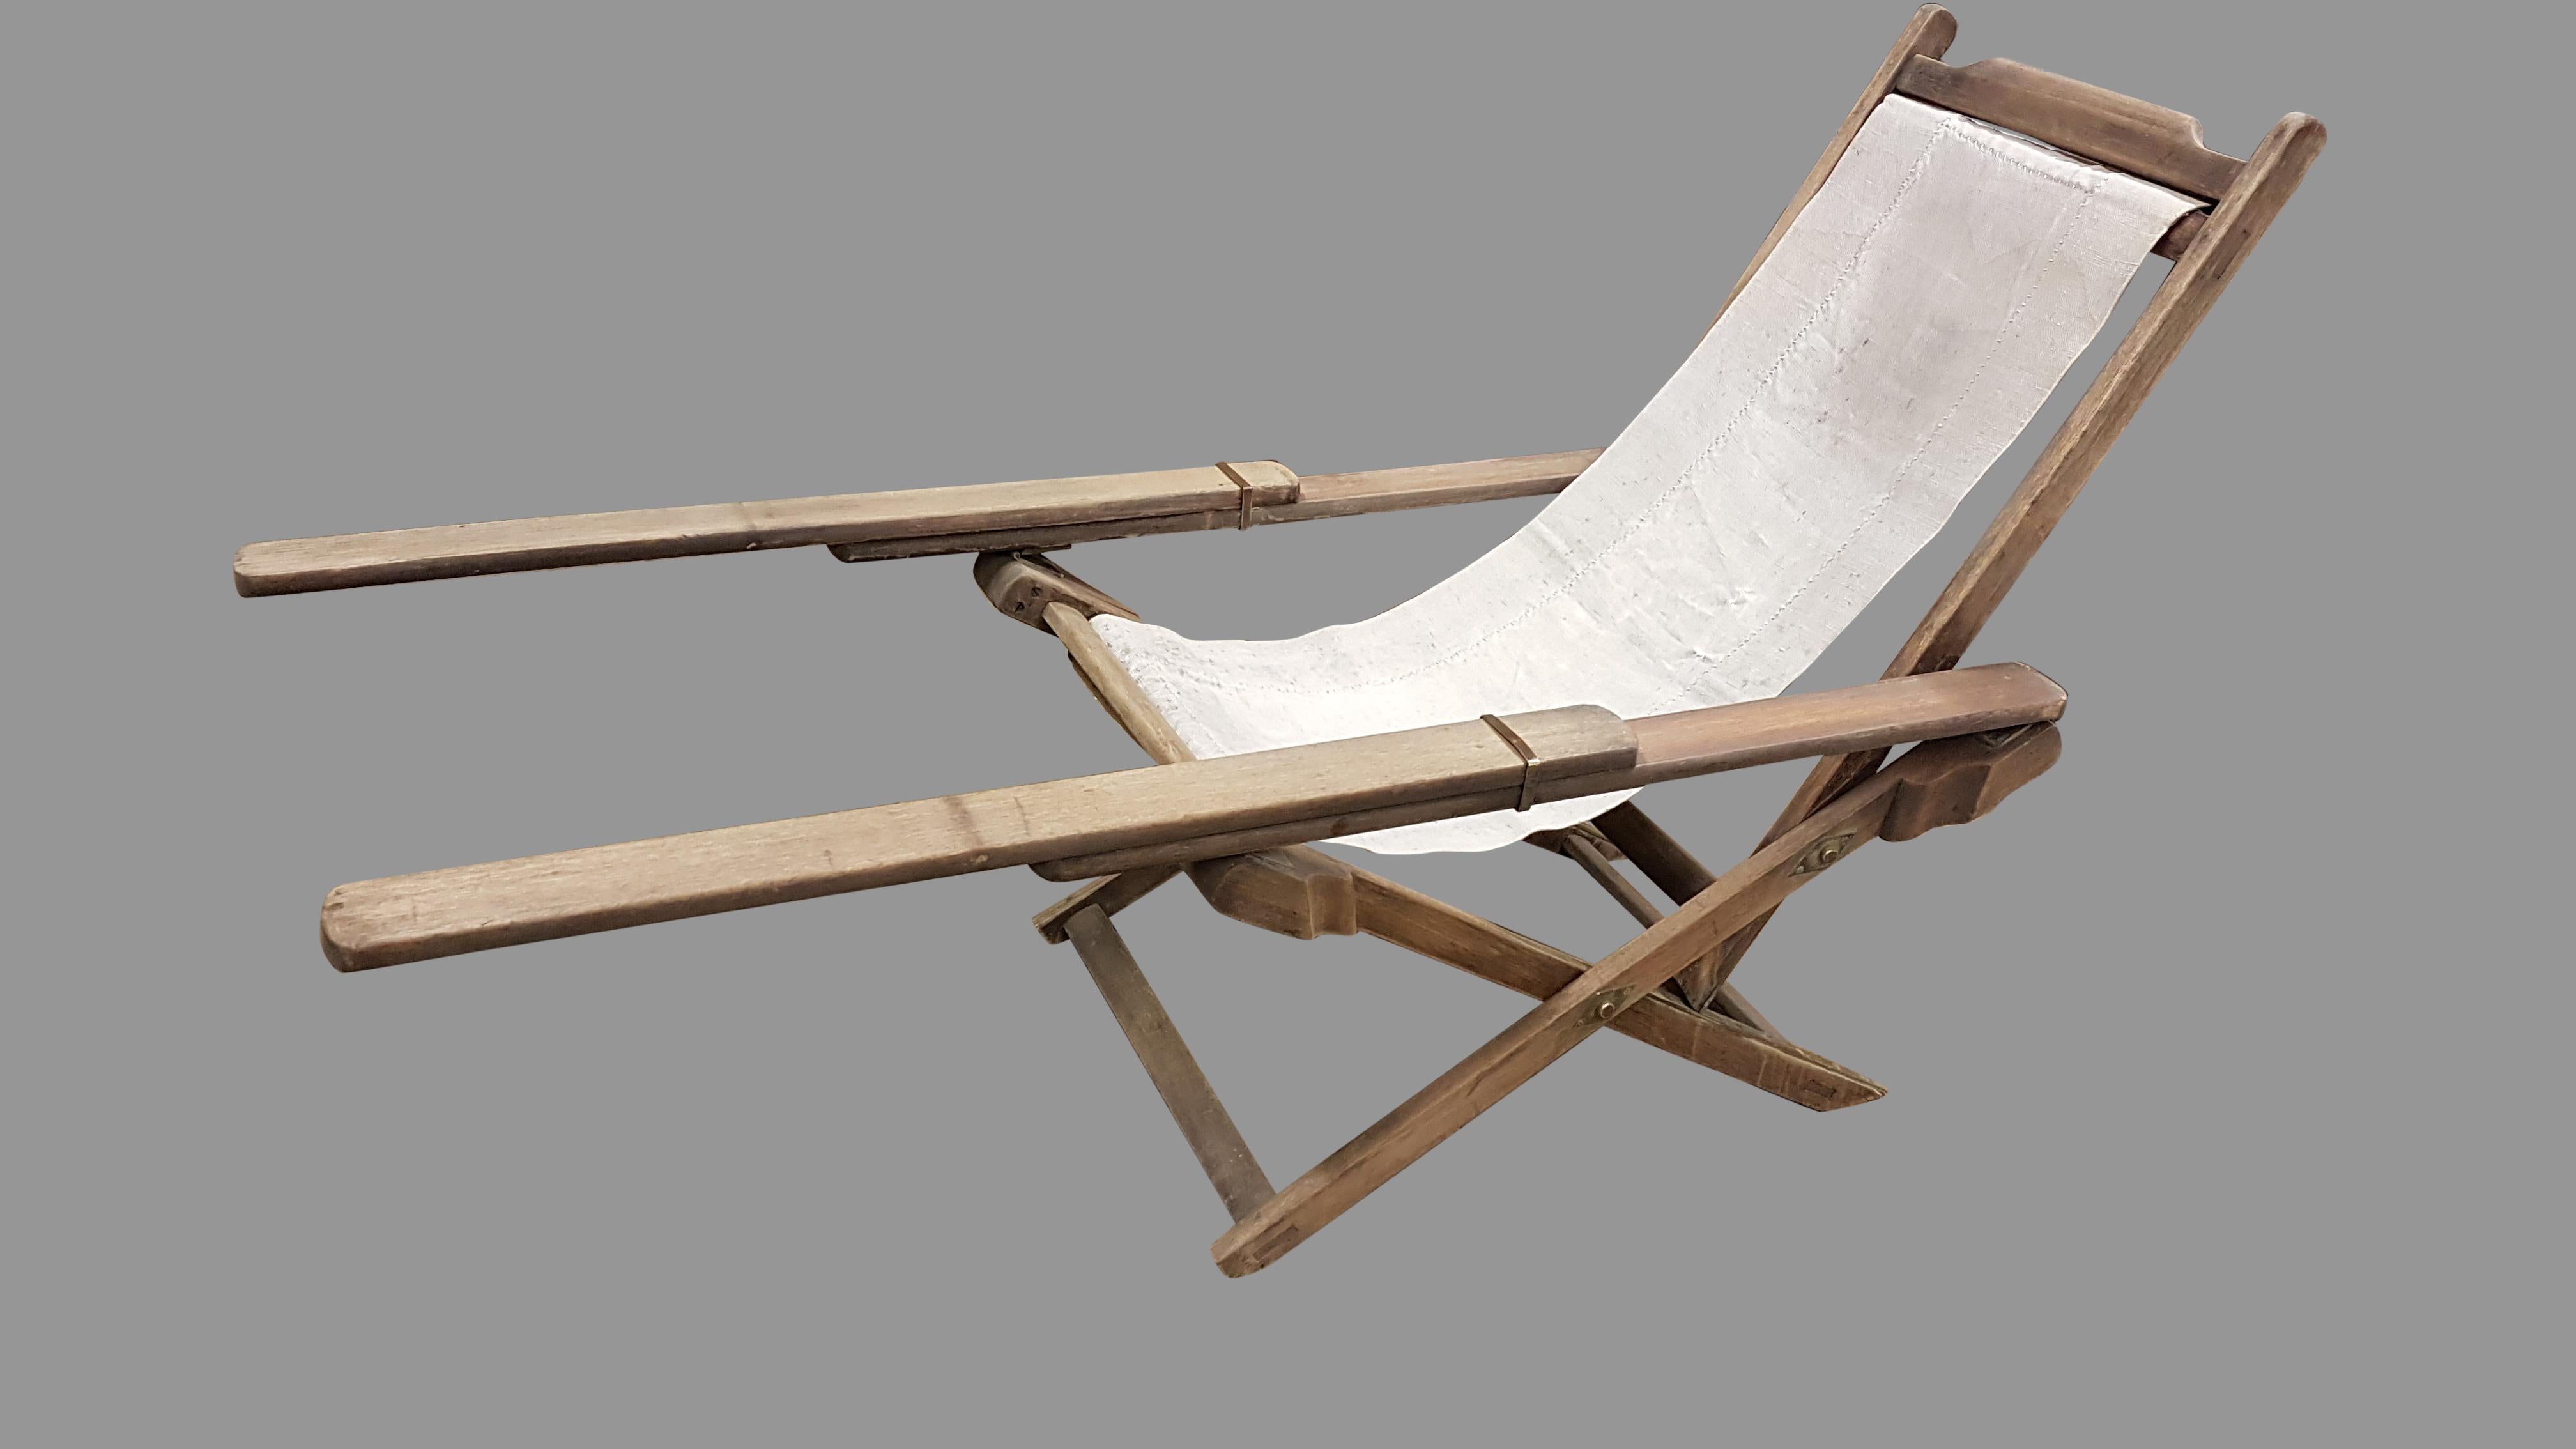 A very nice and quirky early 20th century weathered teak plantation lounger chair, it has three reclining positions and the original canvas slung seat, which although original could be replaced. The finish has a lovely weathered dry appearance and